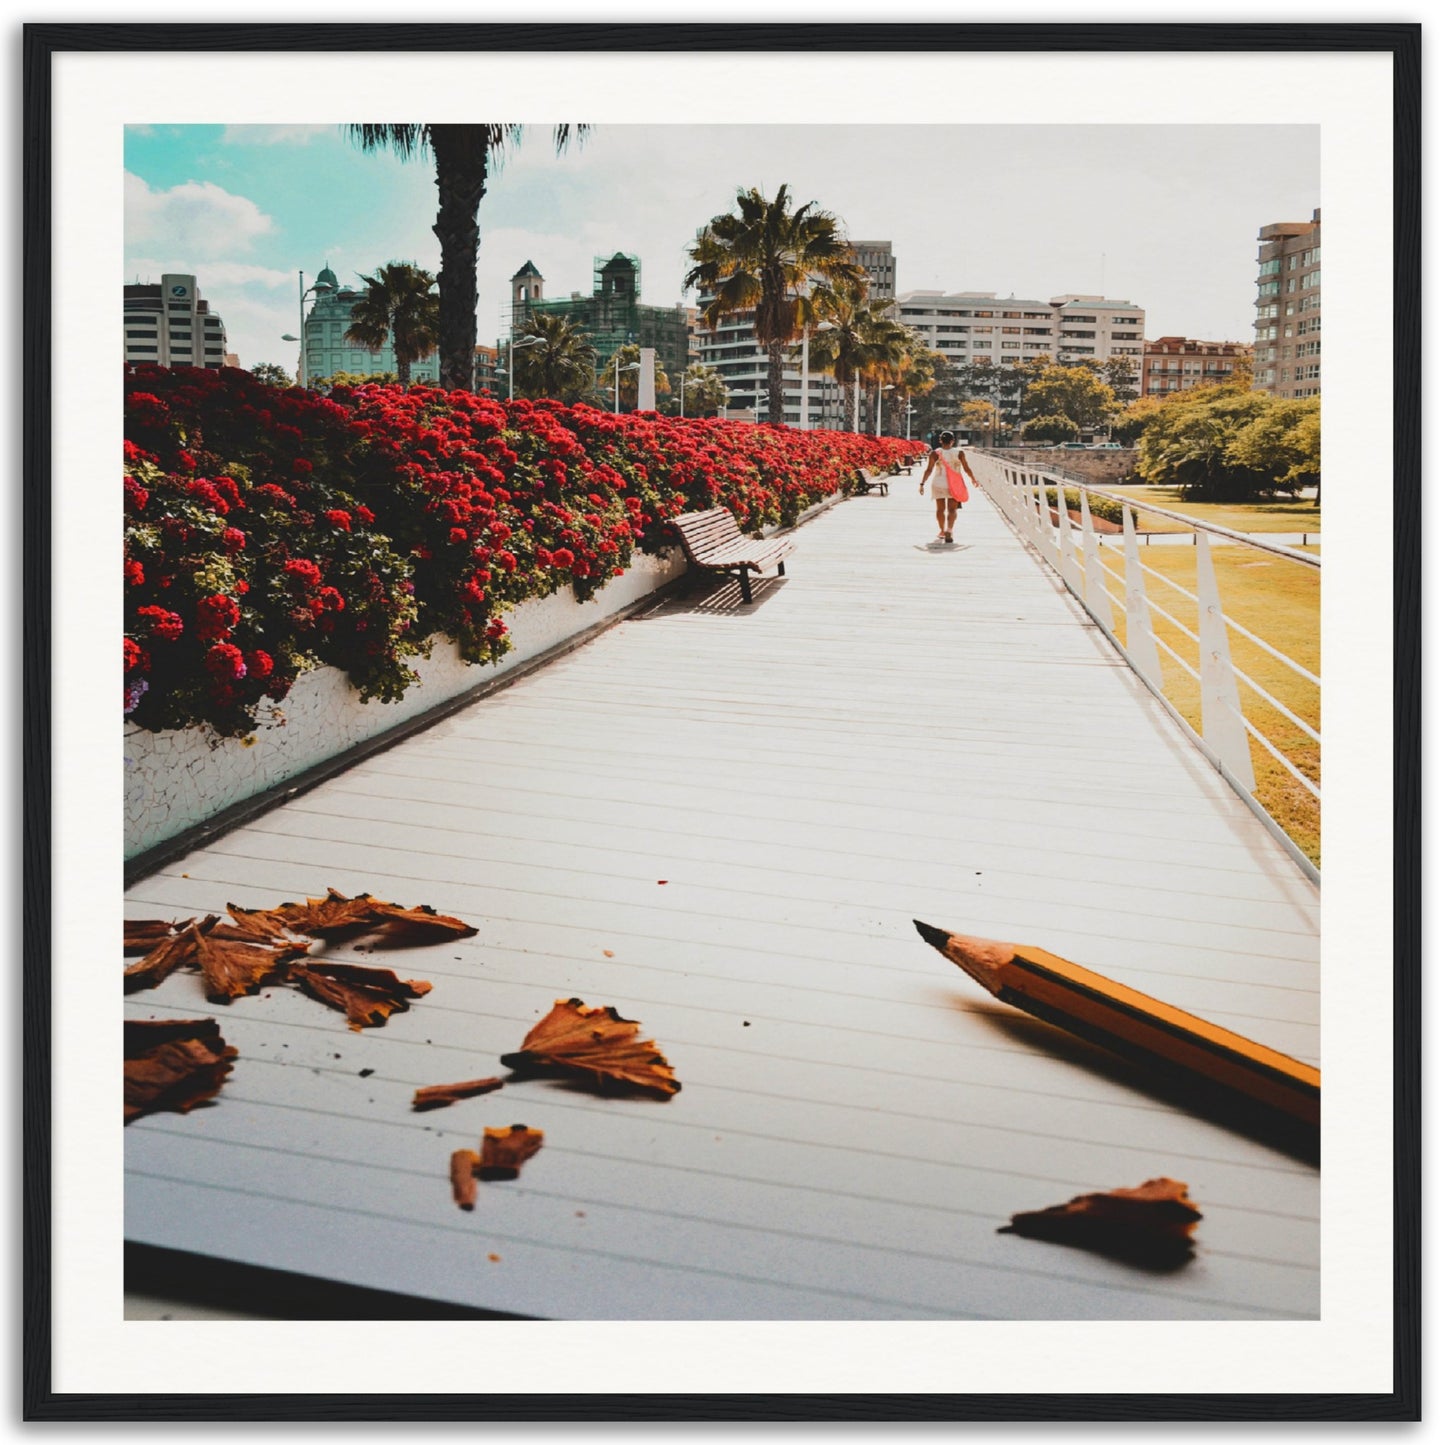 Create Your Own Path #2 - Museum-Quality Framed Art Print